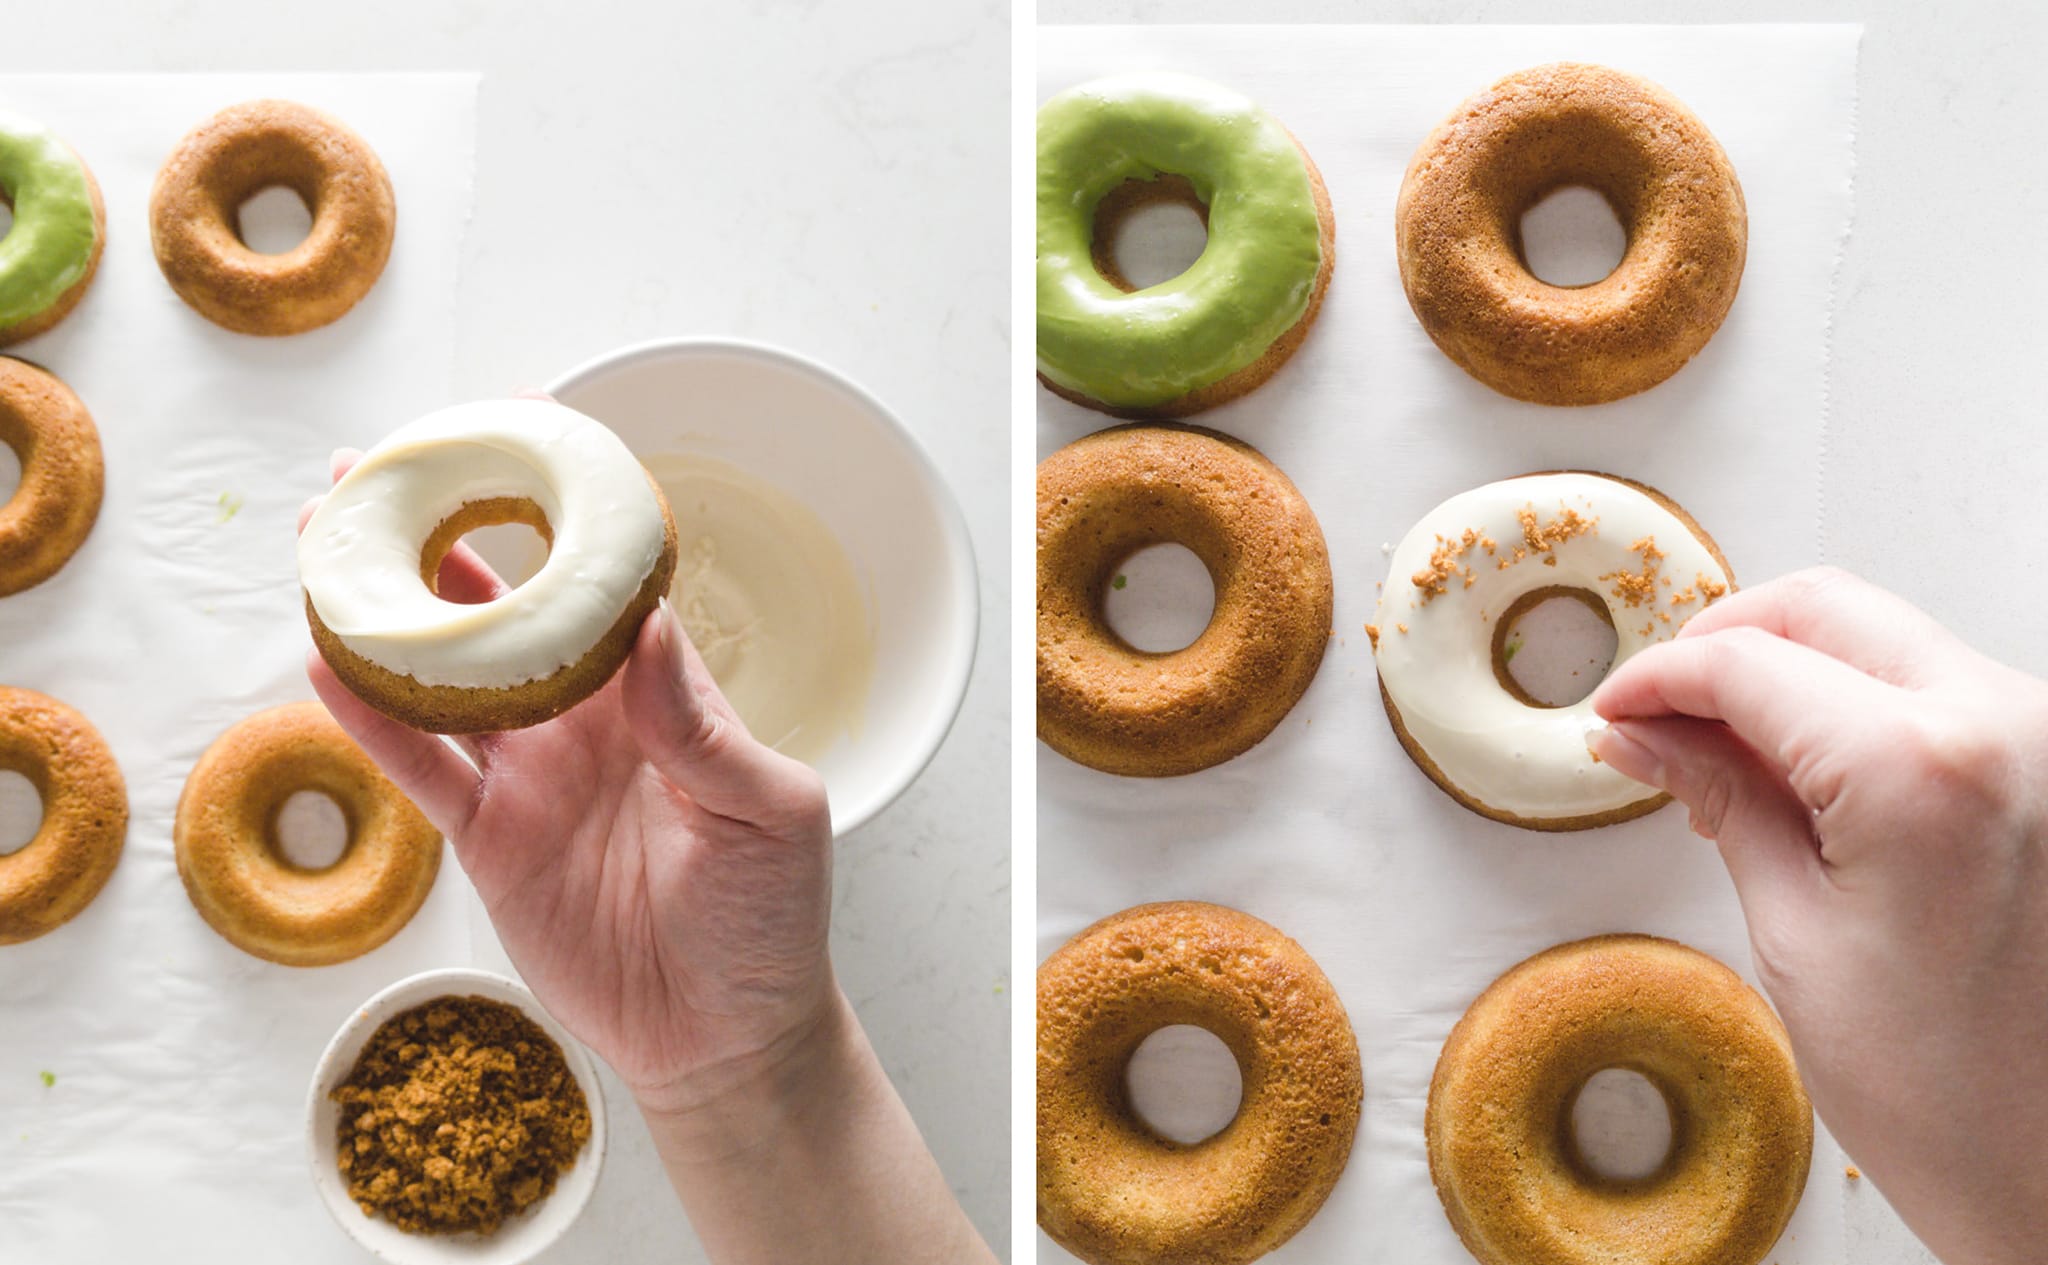 Glazing mochi donuts with melted white chocolate.